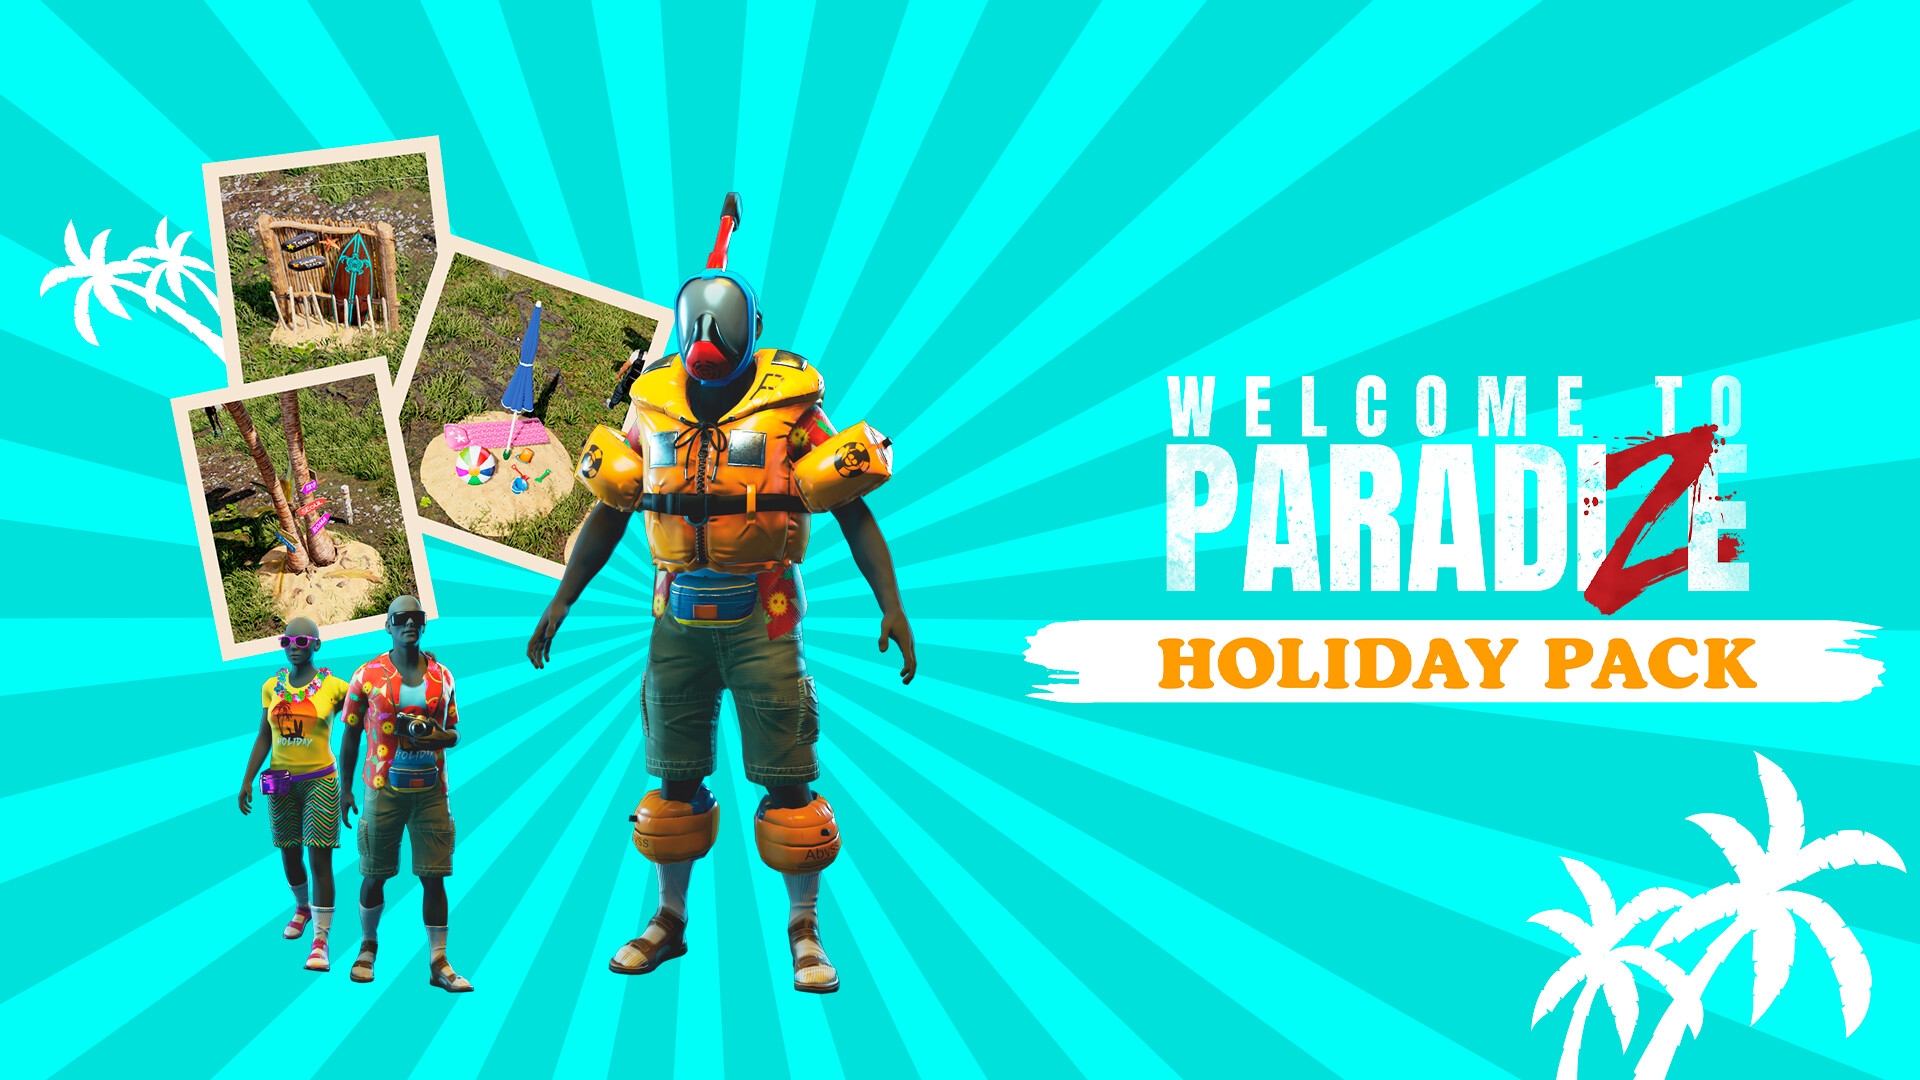 Welcome to ParadiZe - Holidays Cosmetic Pack Featured Screenshot #1